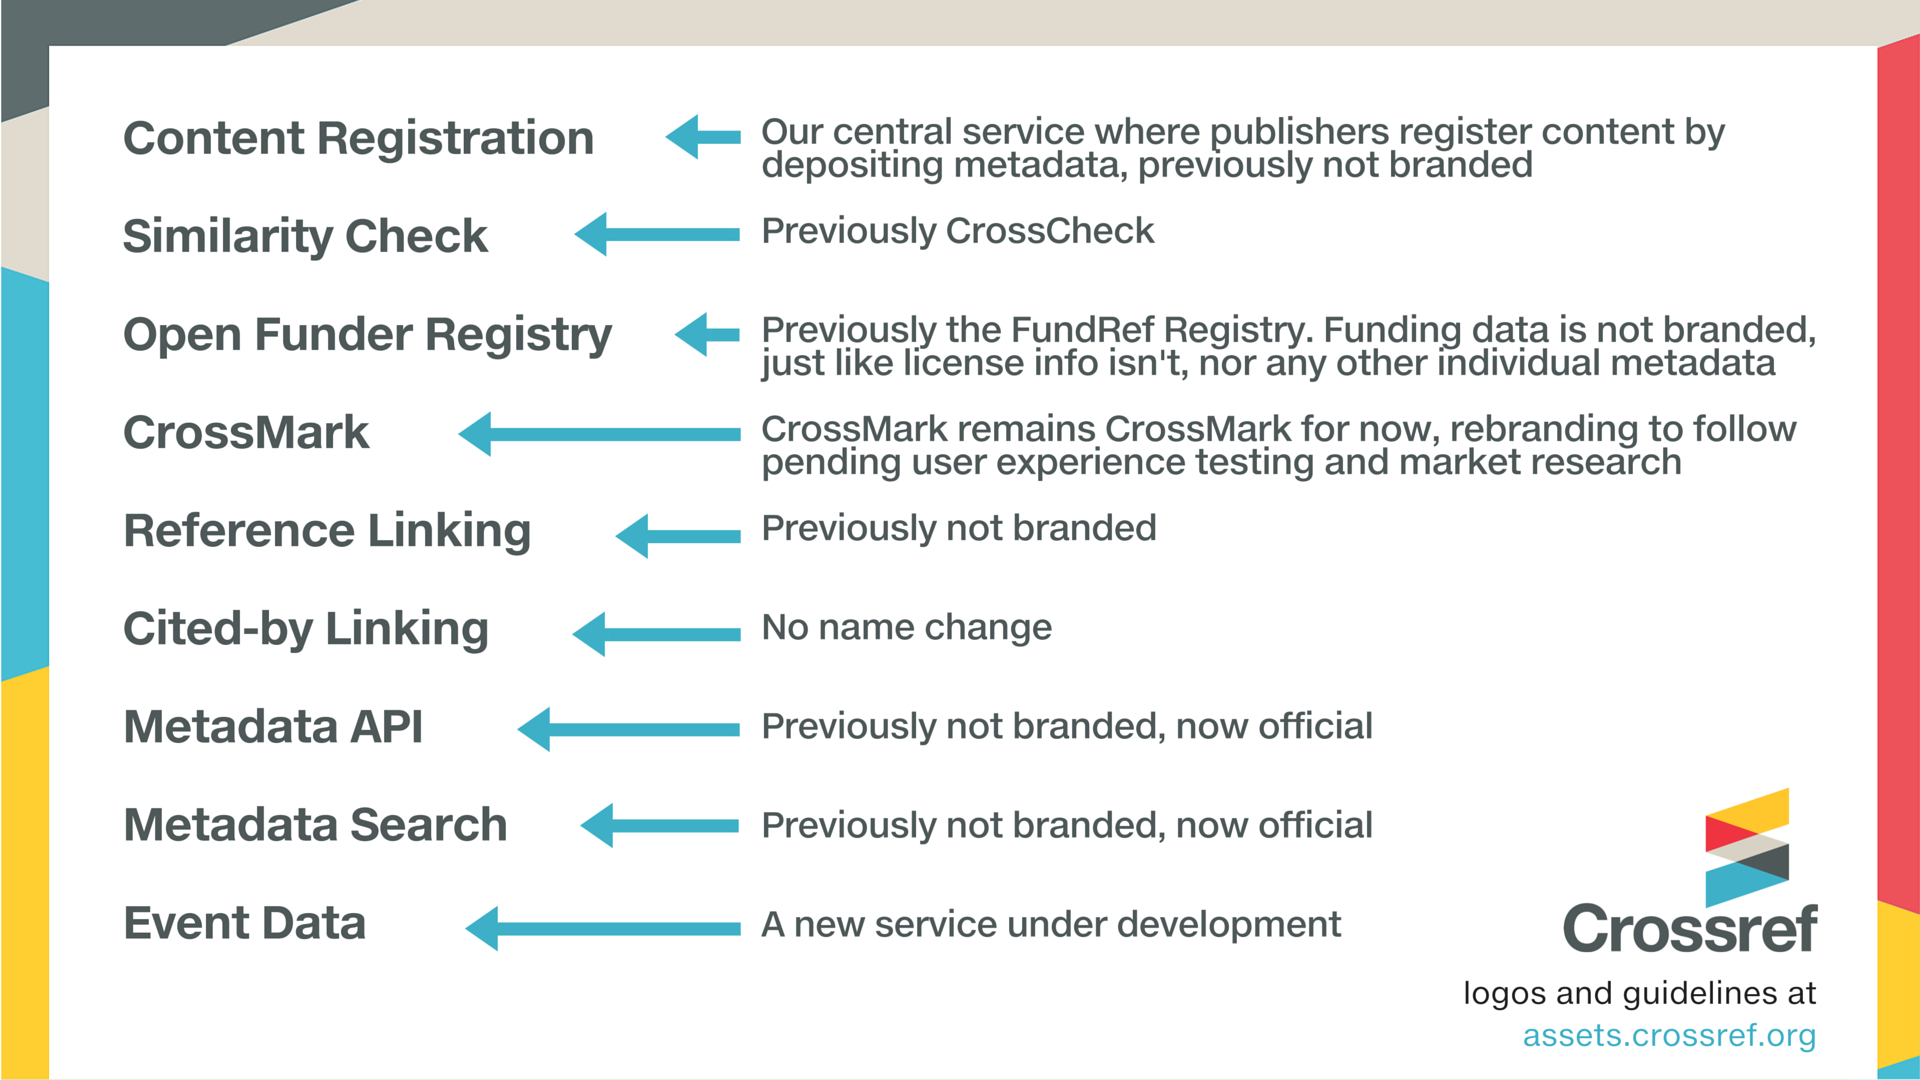 Overview of brand name changes, April 2016